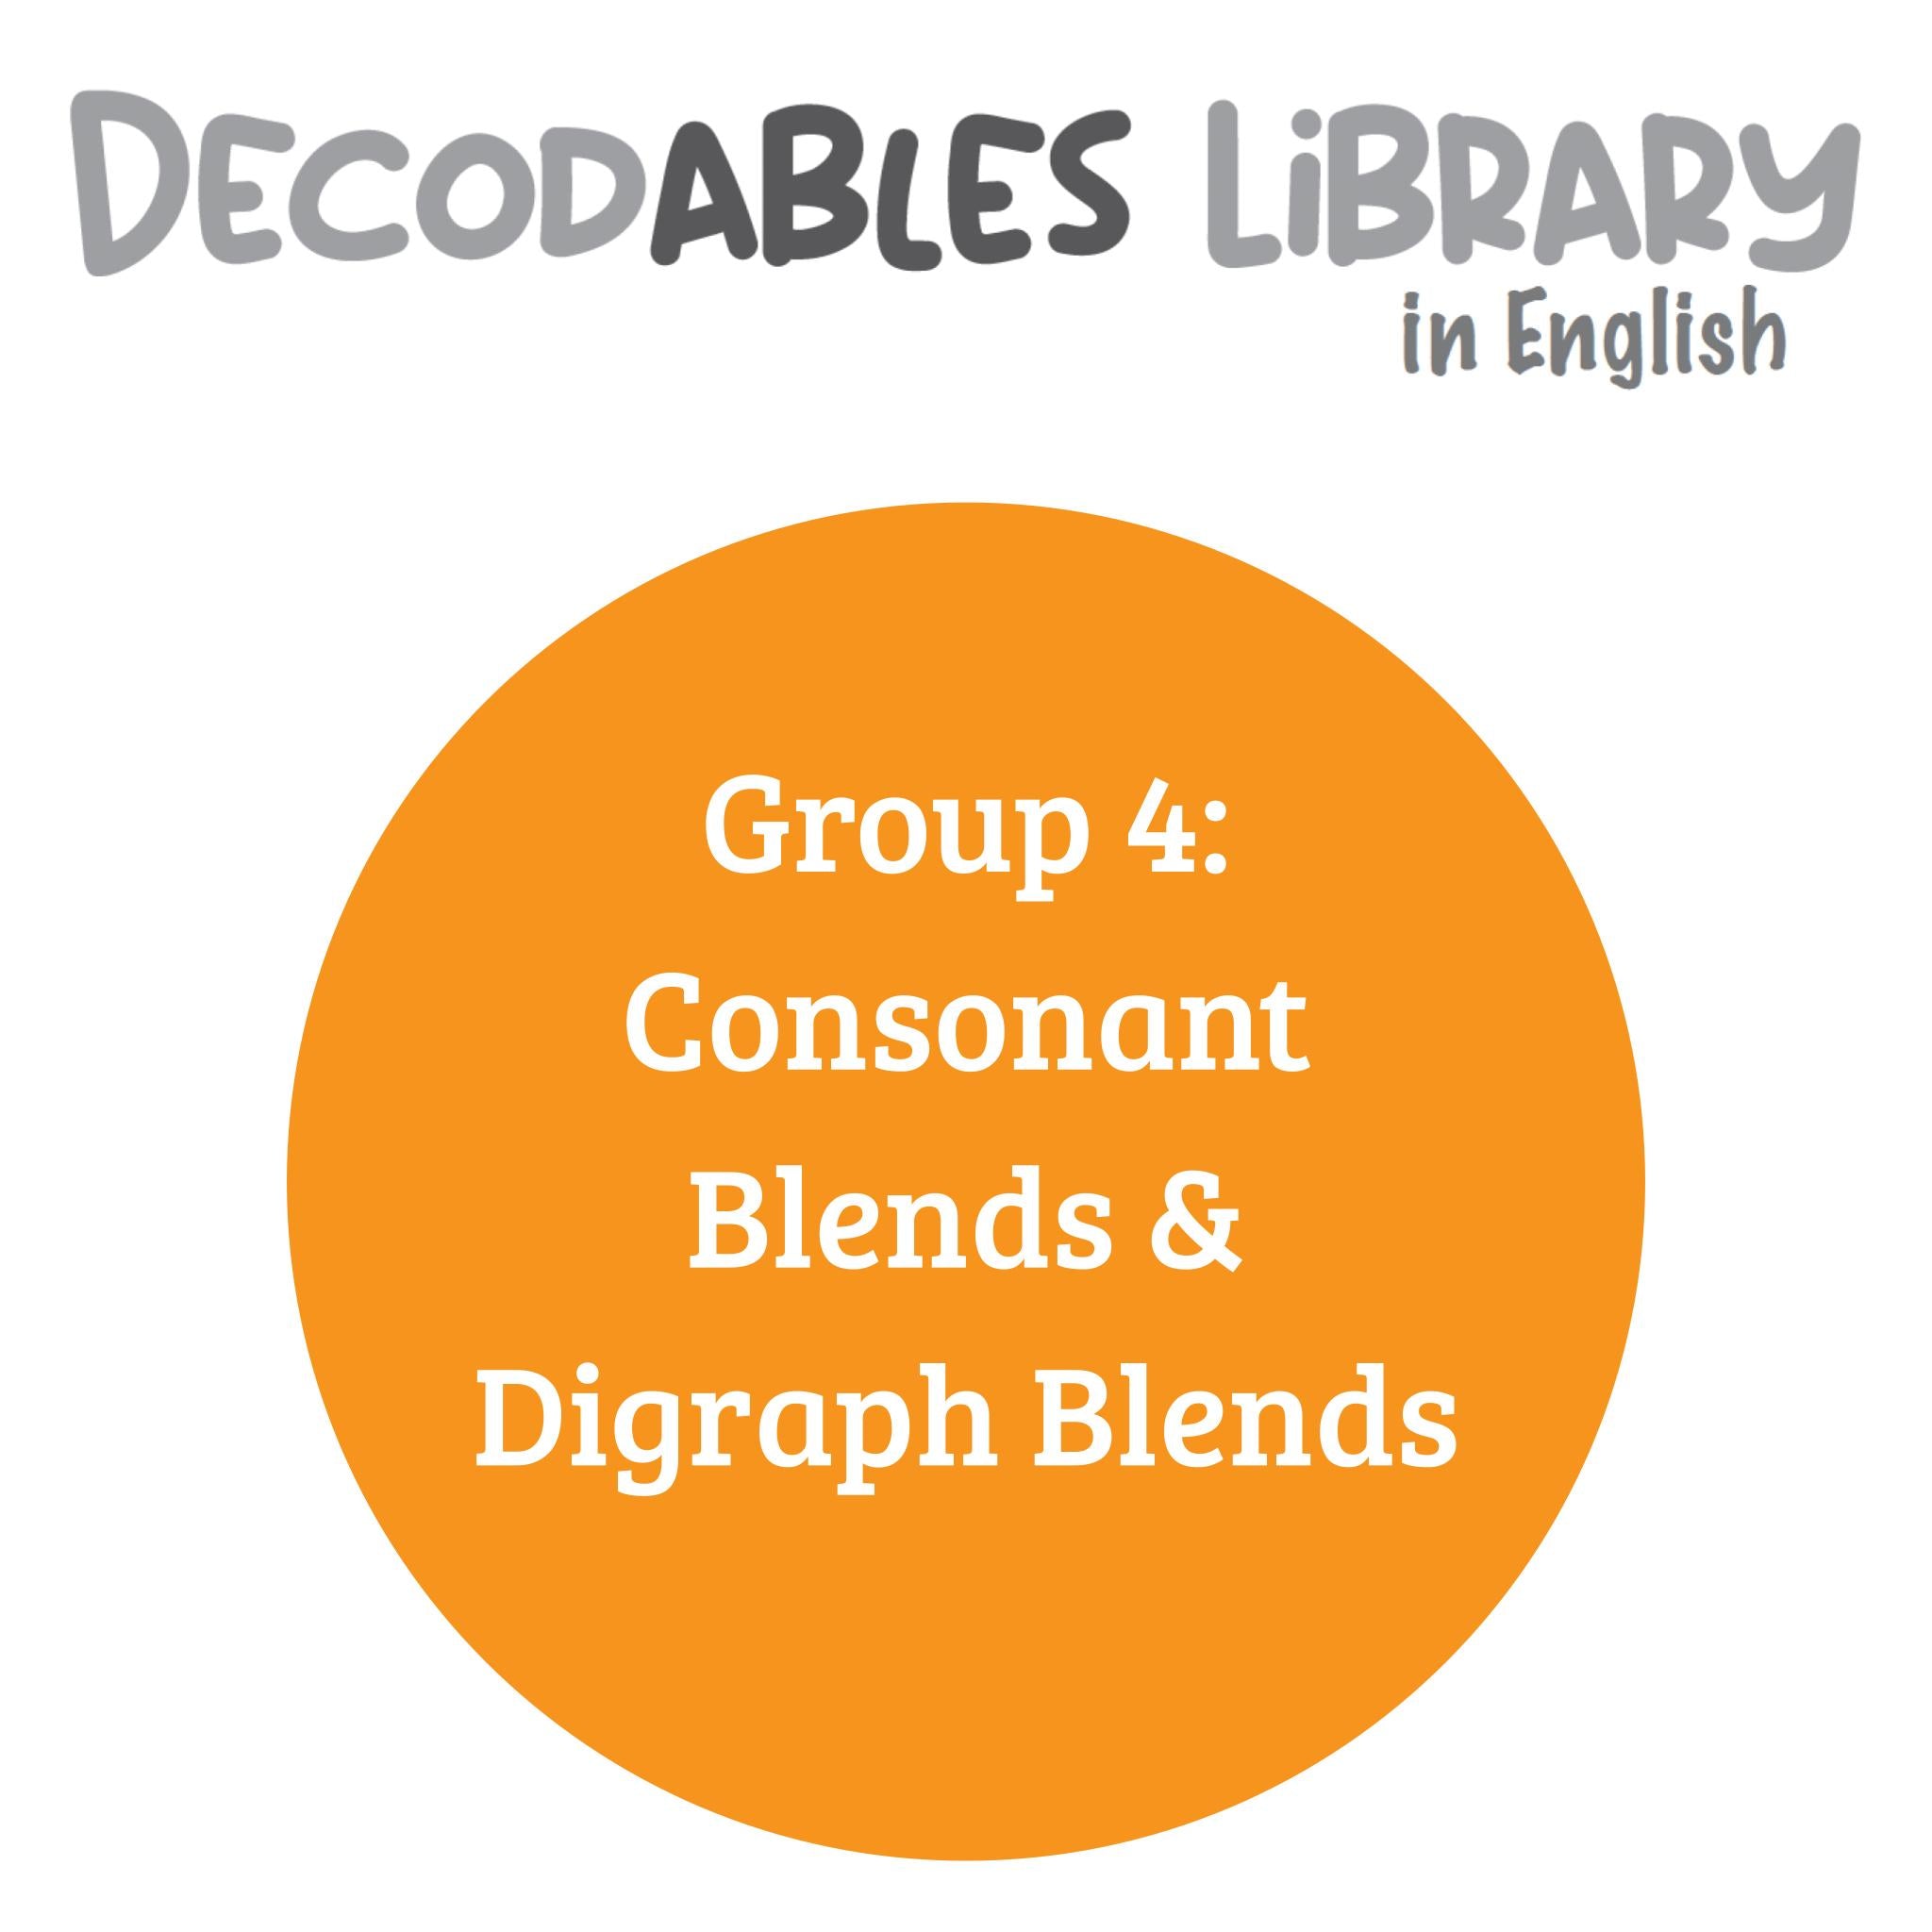 English Decodables Library - Group 4: Consonant Blends & Digraph Blends (set of 7 titles)